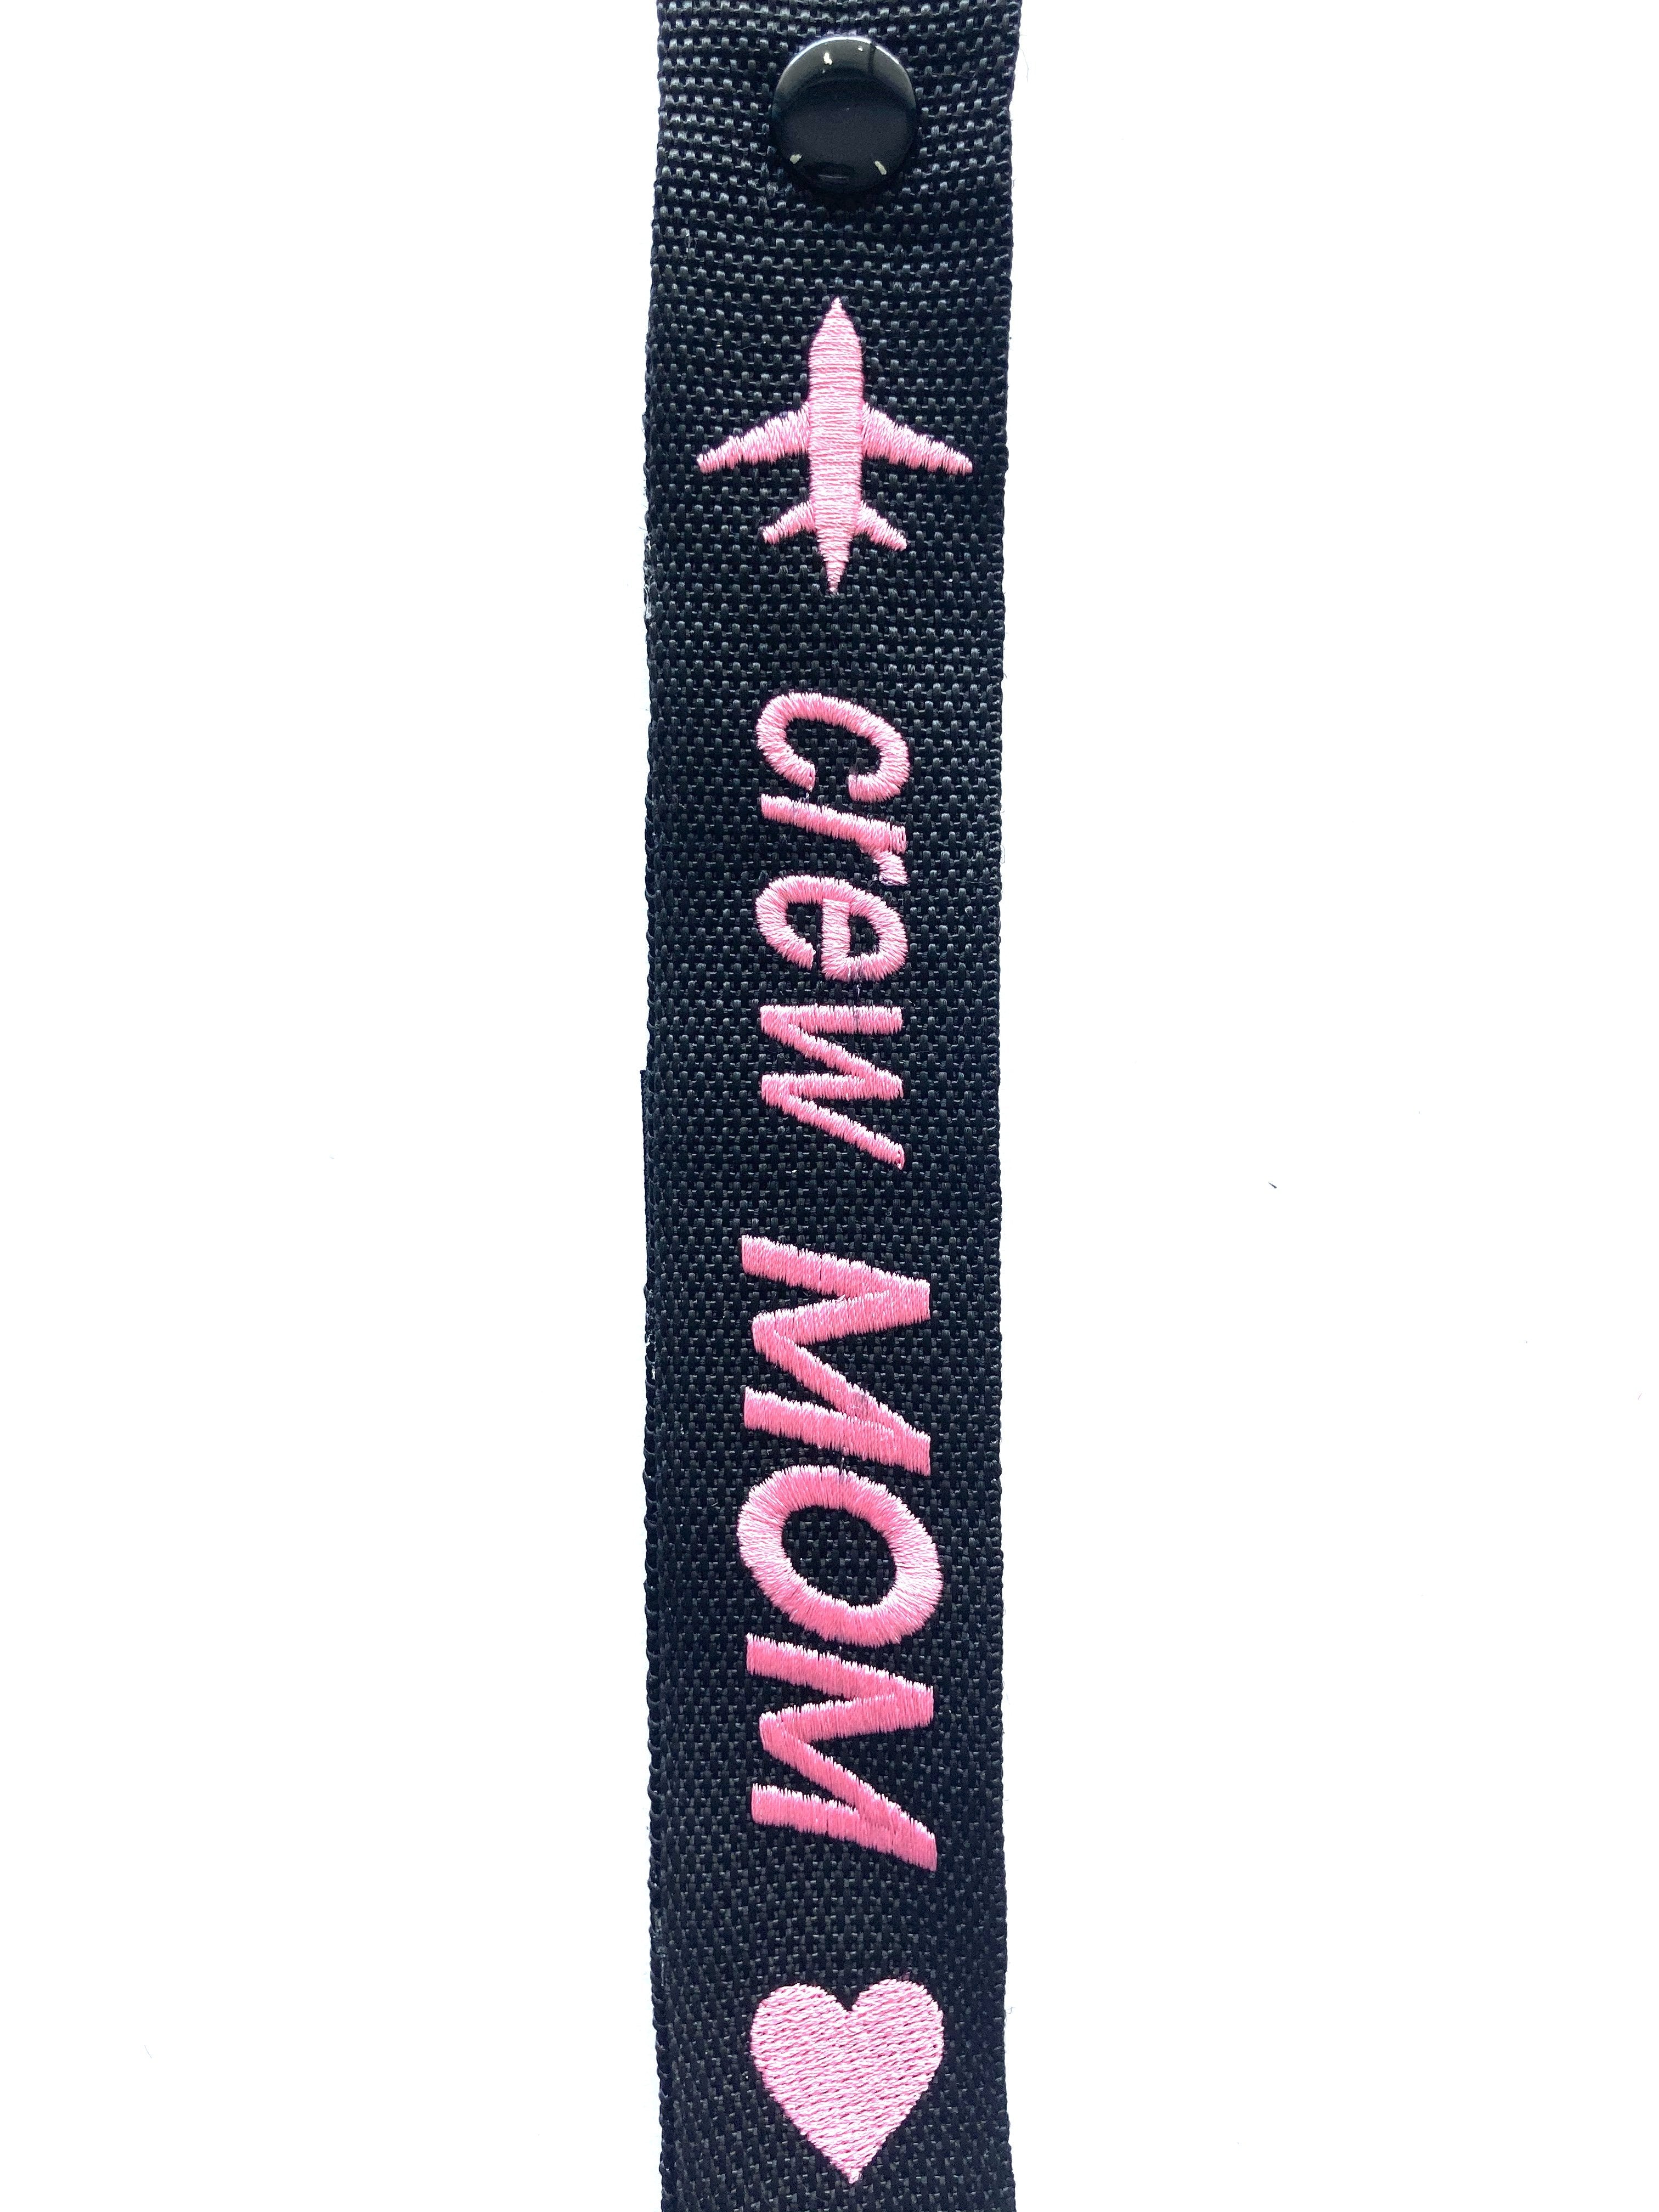 CREW FAMILY LUGGAGE TAGS Crew Mom Luggage Tag Pink